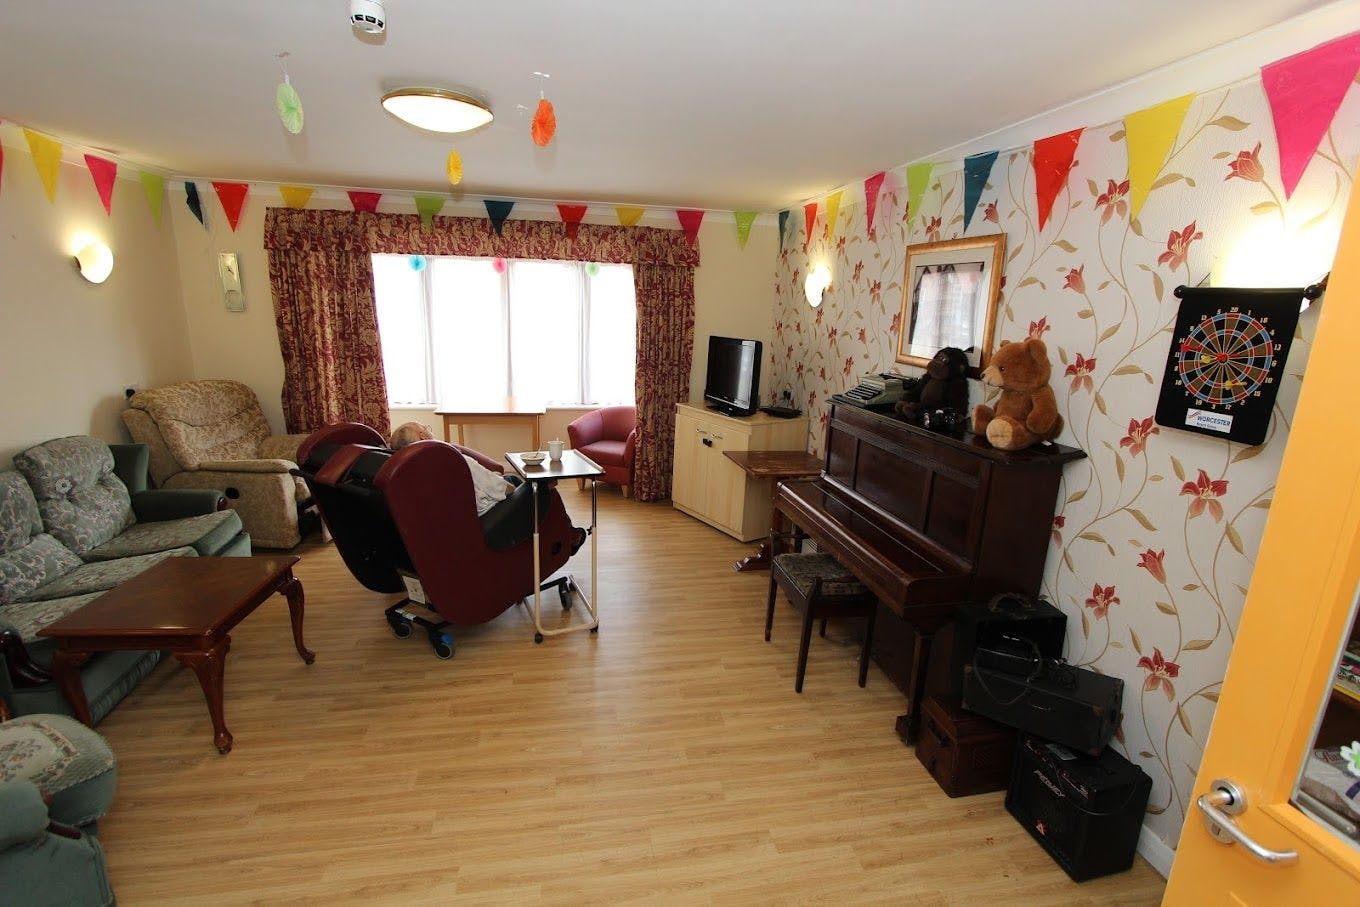 Shaw Healthcare - The Hawthorns care home 001